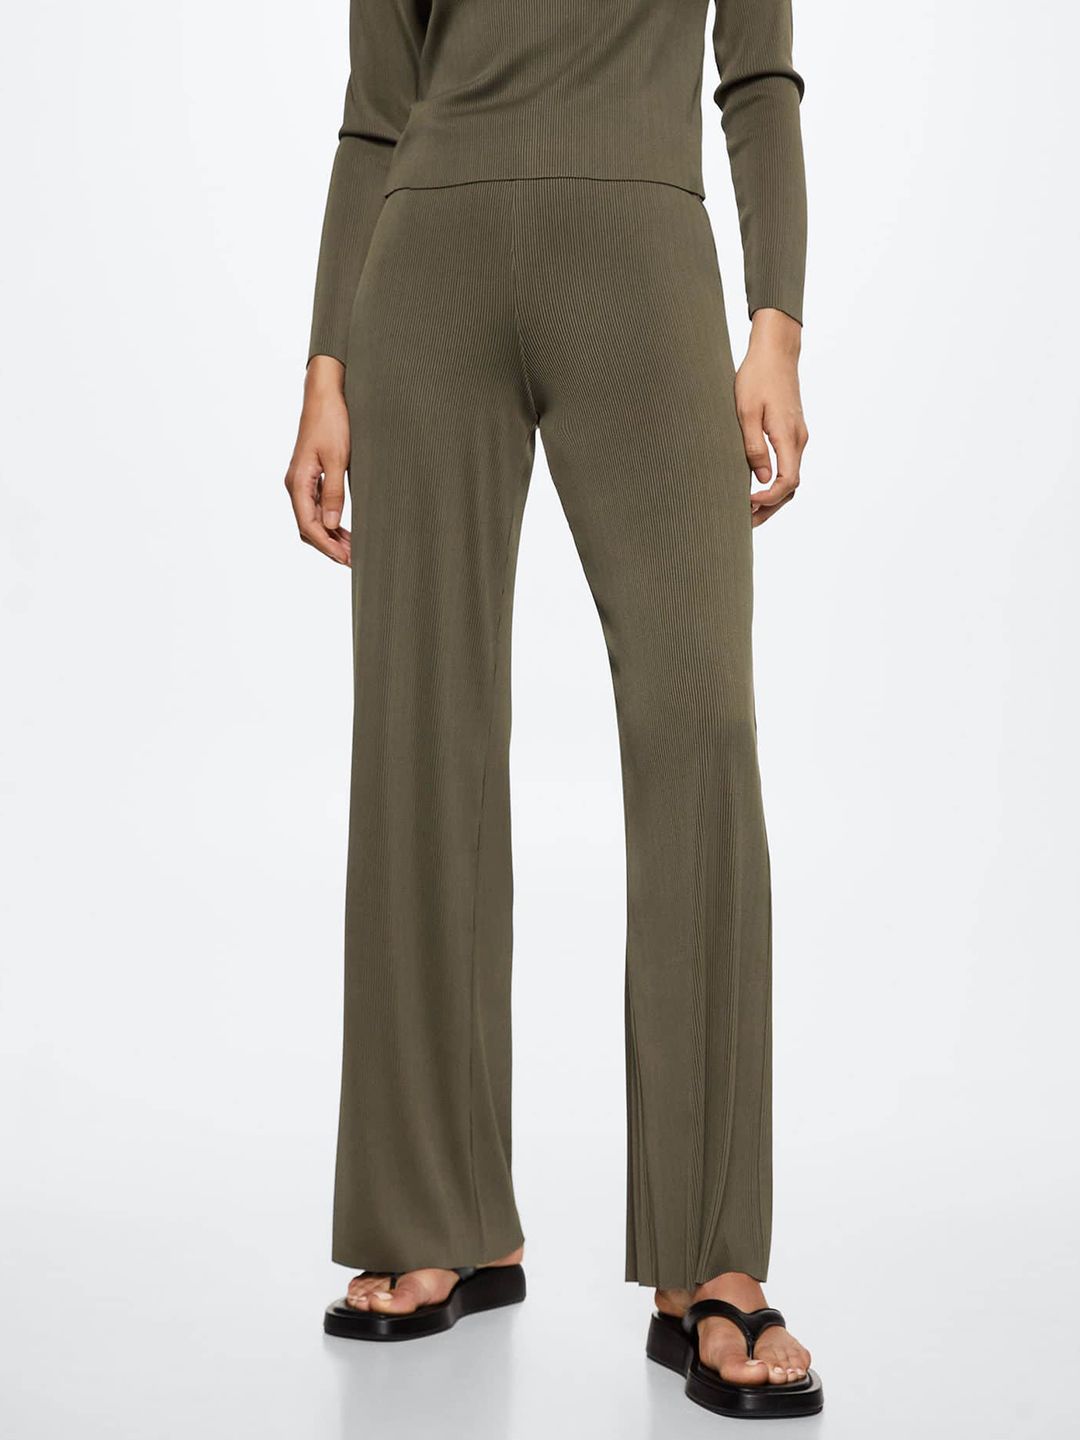 MANGO Women Olive Green Solid Parallel Trousers Price in India